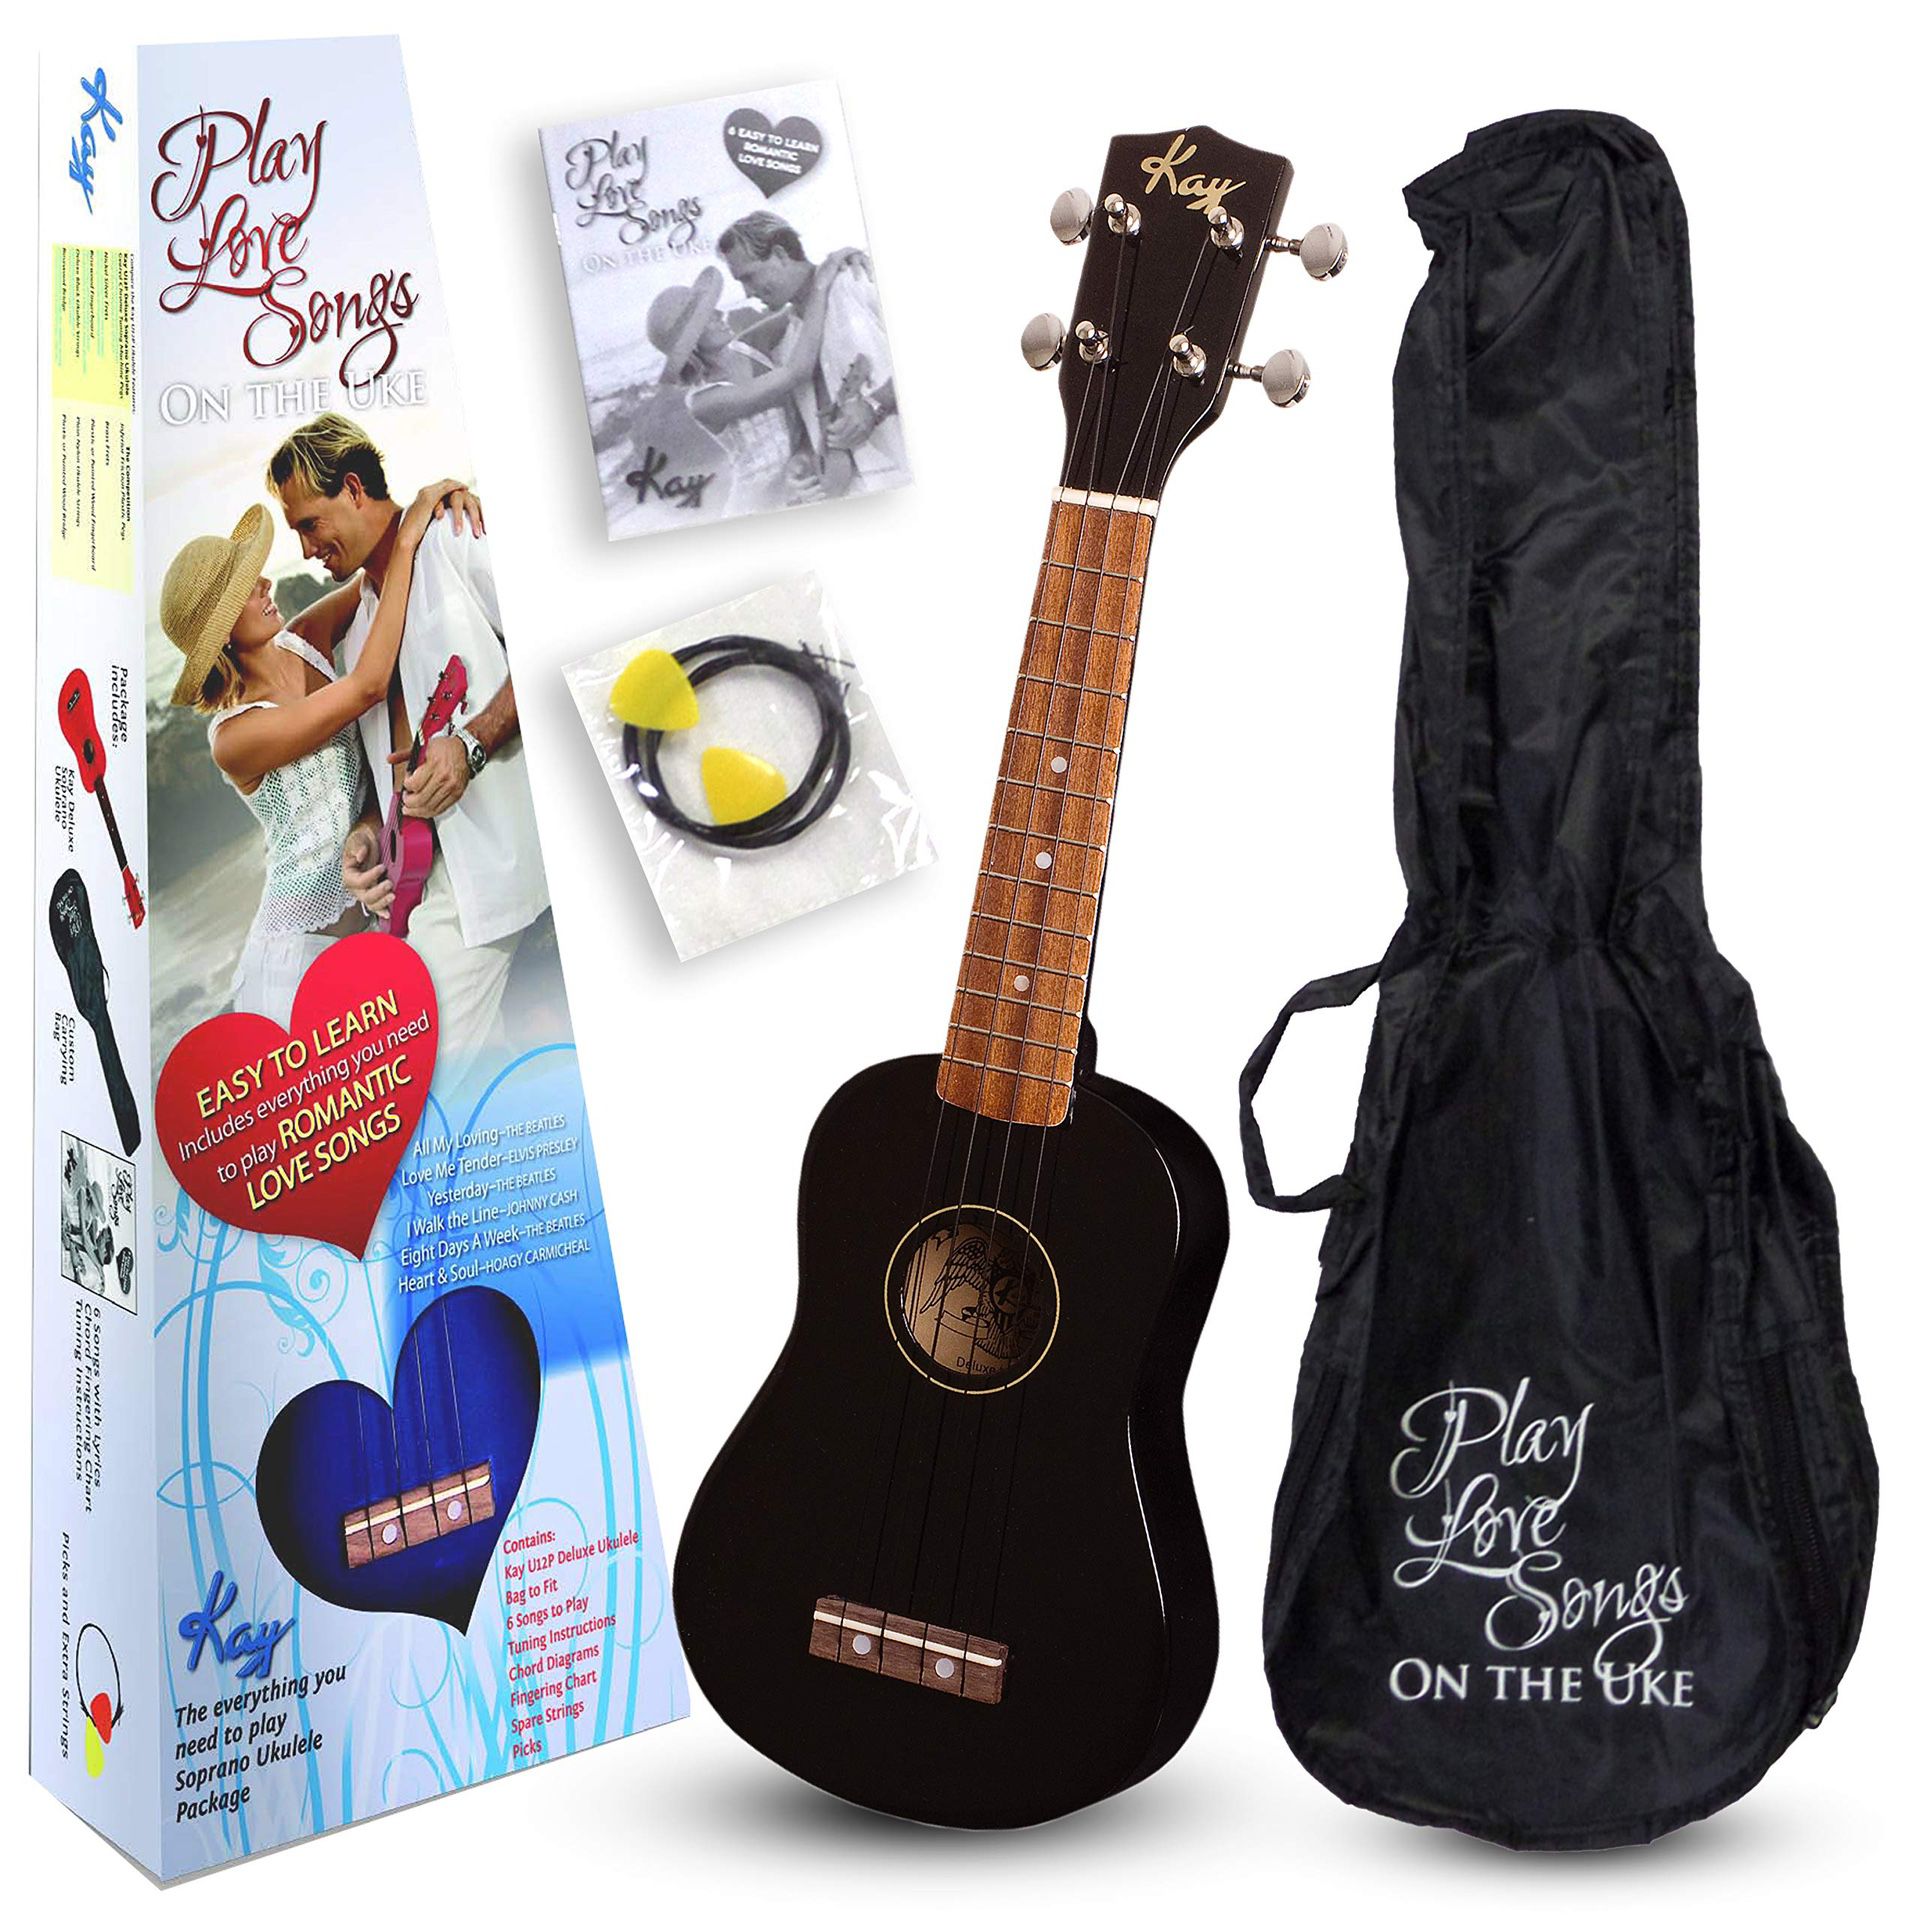 Deluxe Soprano Ukulele Package, 4-String, Right Handed, Jet Black, Includes 6 Love Songs & Chords for Uke  Learn To Play Love Songs $49.99